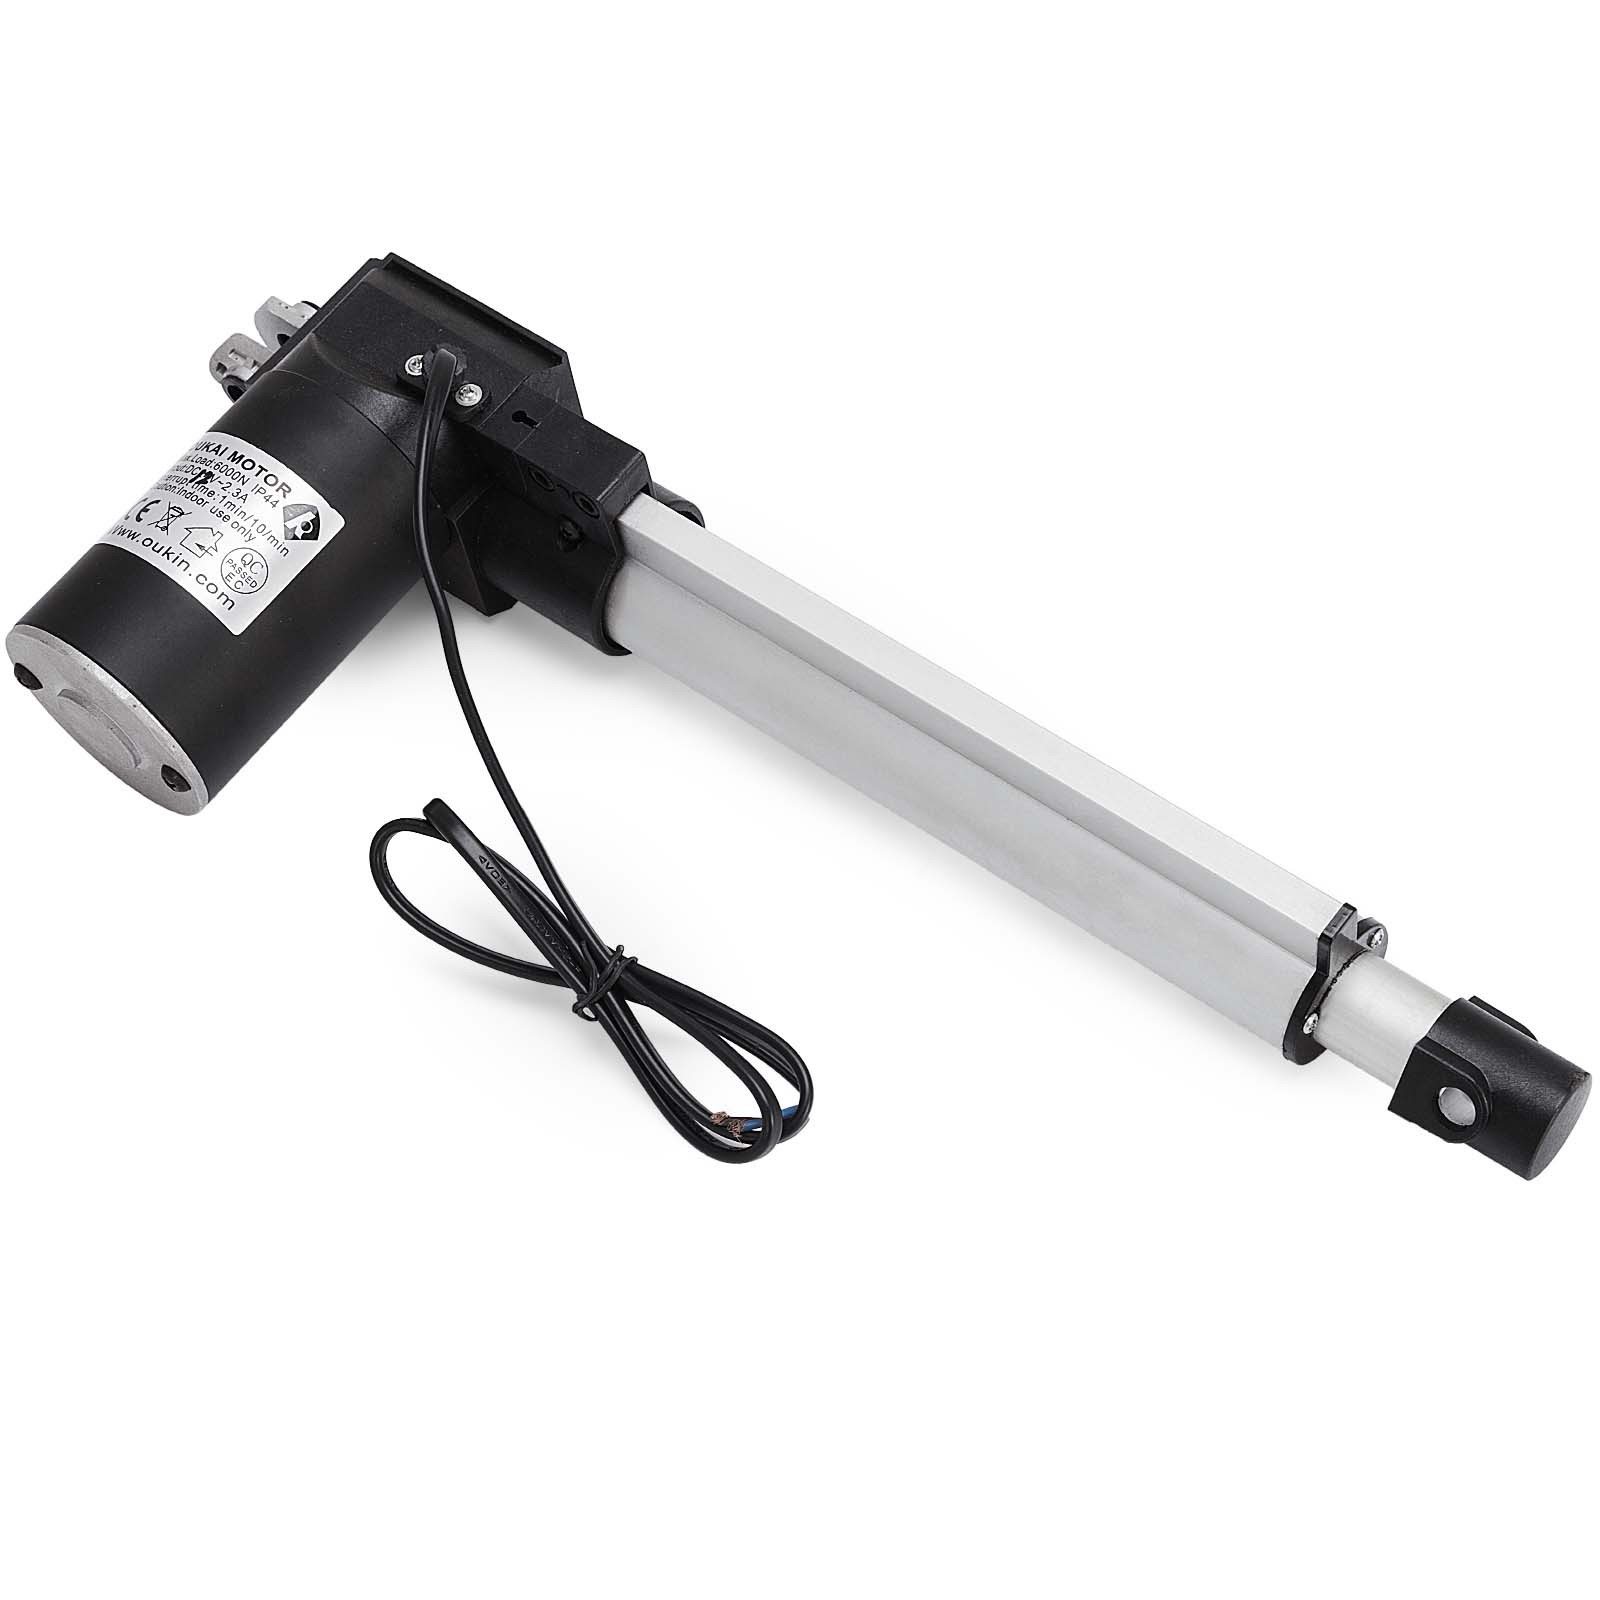 Details about   18'' 6000N Electric Linear Actuator 1320lb Lift Heavy Duty 12V Linear Actuator 